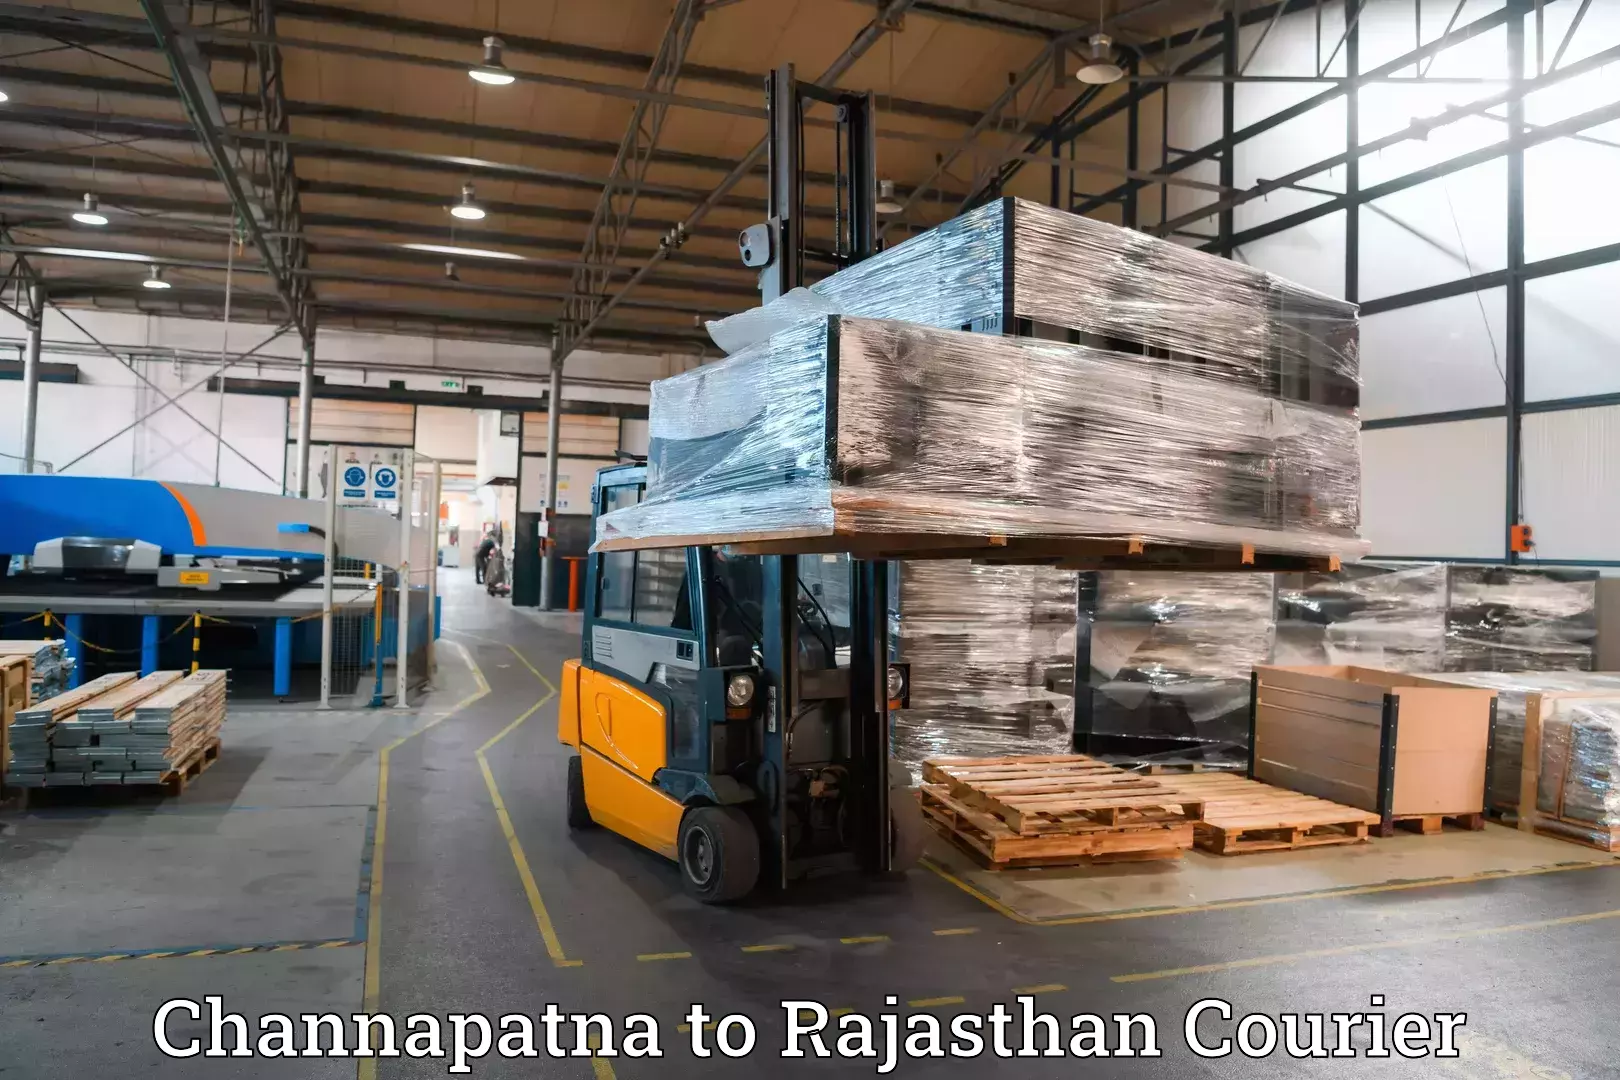 Luggage transport consultancy Channapatna to Rajasthan